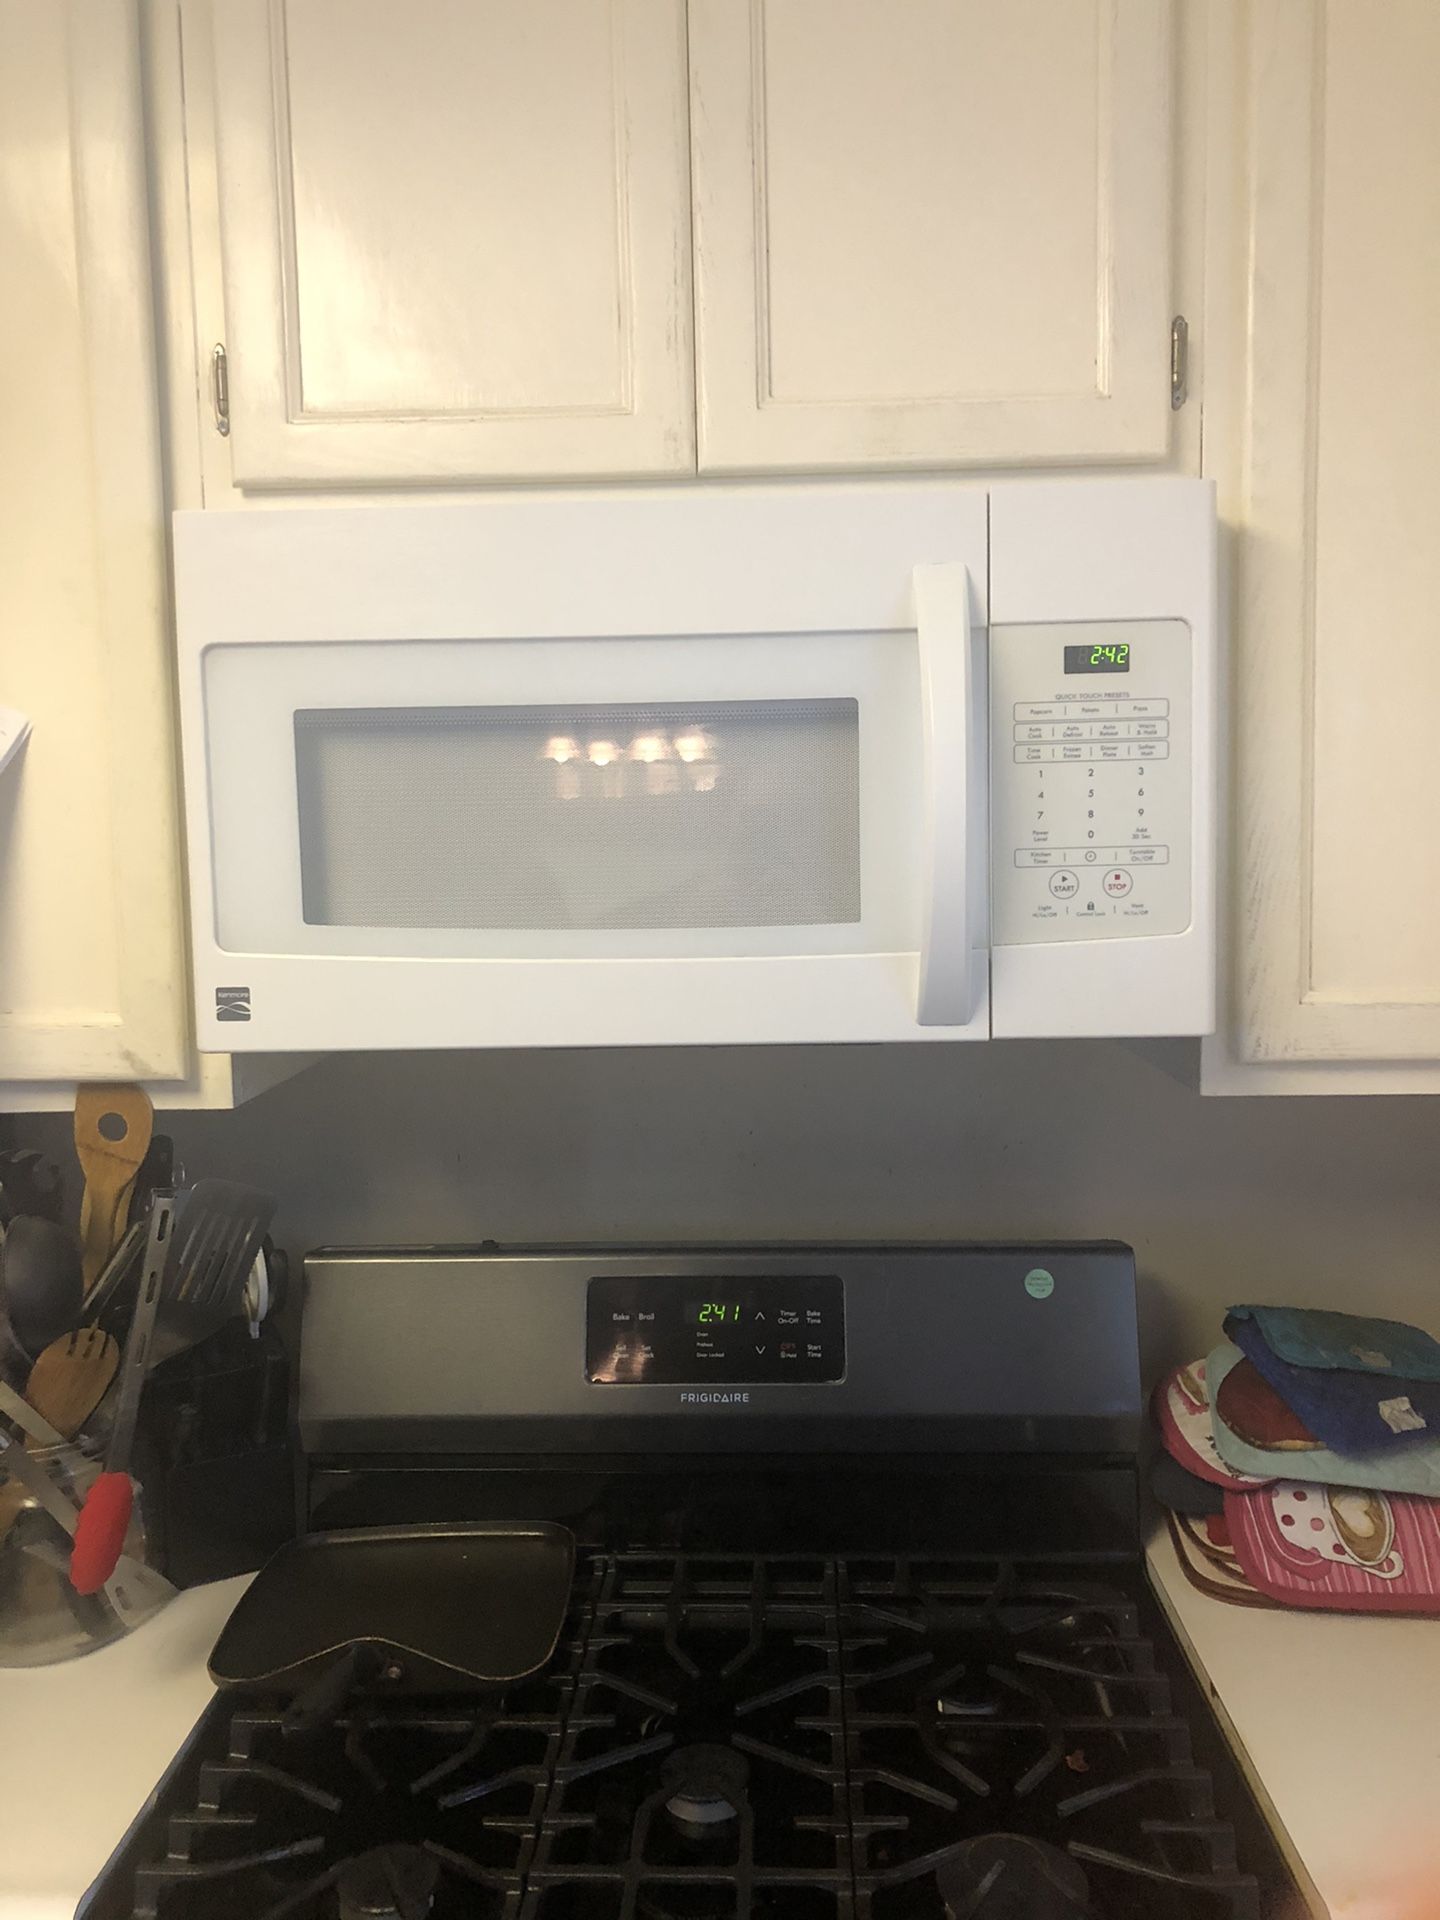 Kenmoore microwave oven. Good condition. Just bought a black stainless one.